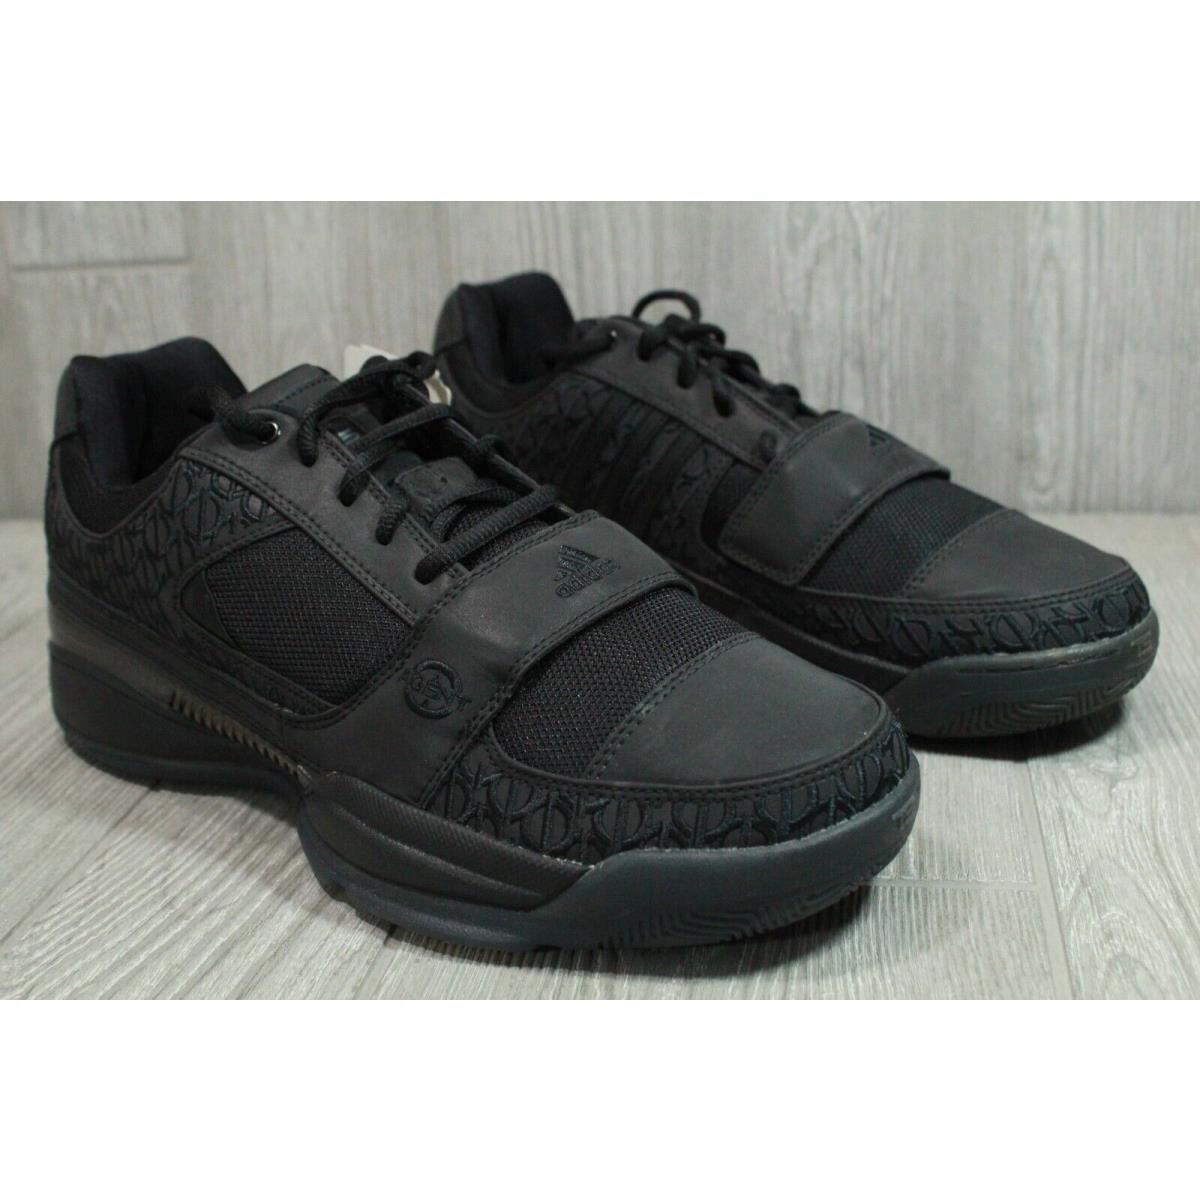 Vintage Adidas TS Lightswitch Gil Agent 0 Basketball Shoes 2008 Mens 11 Oss | 692740456232 - Adidas shoes - Black |